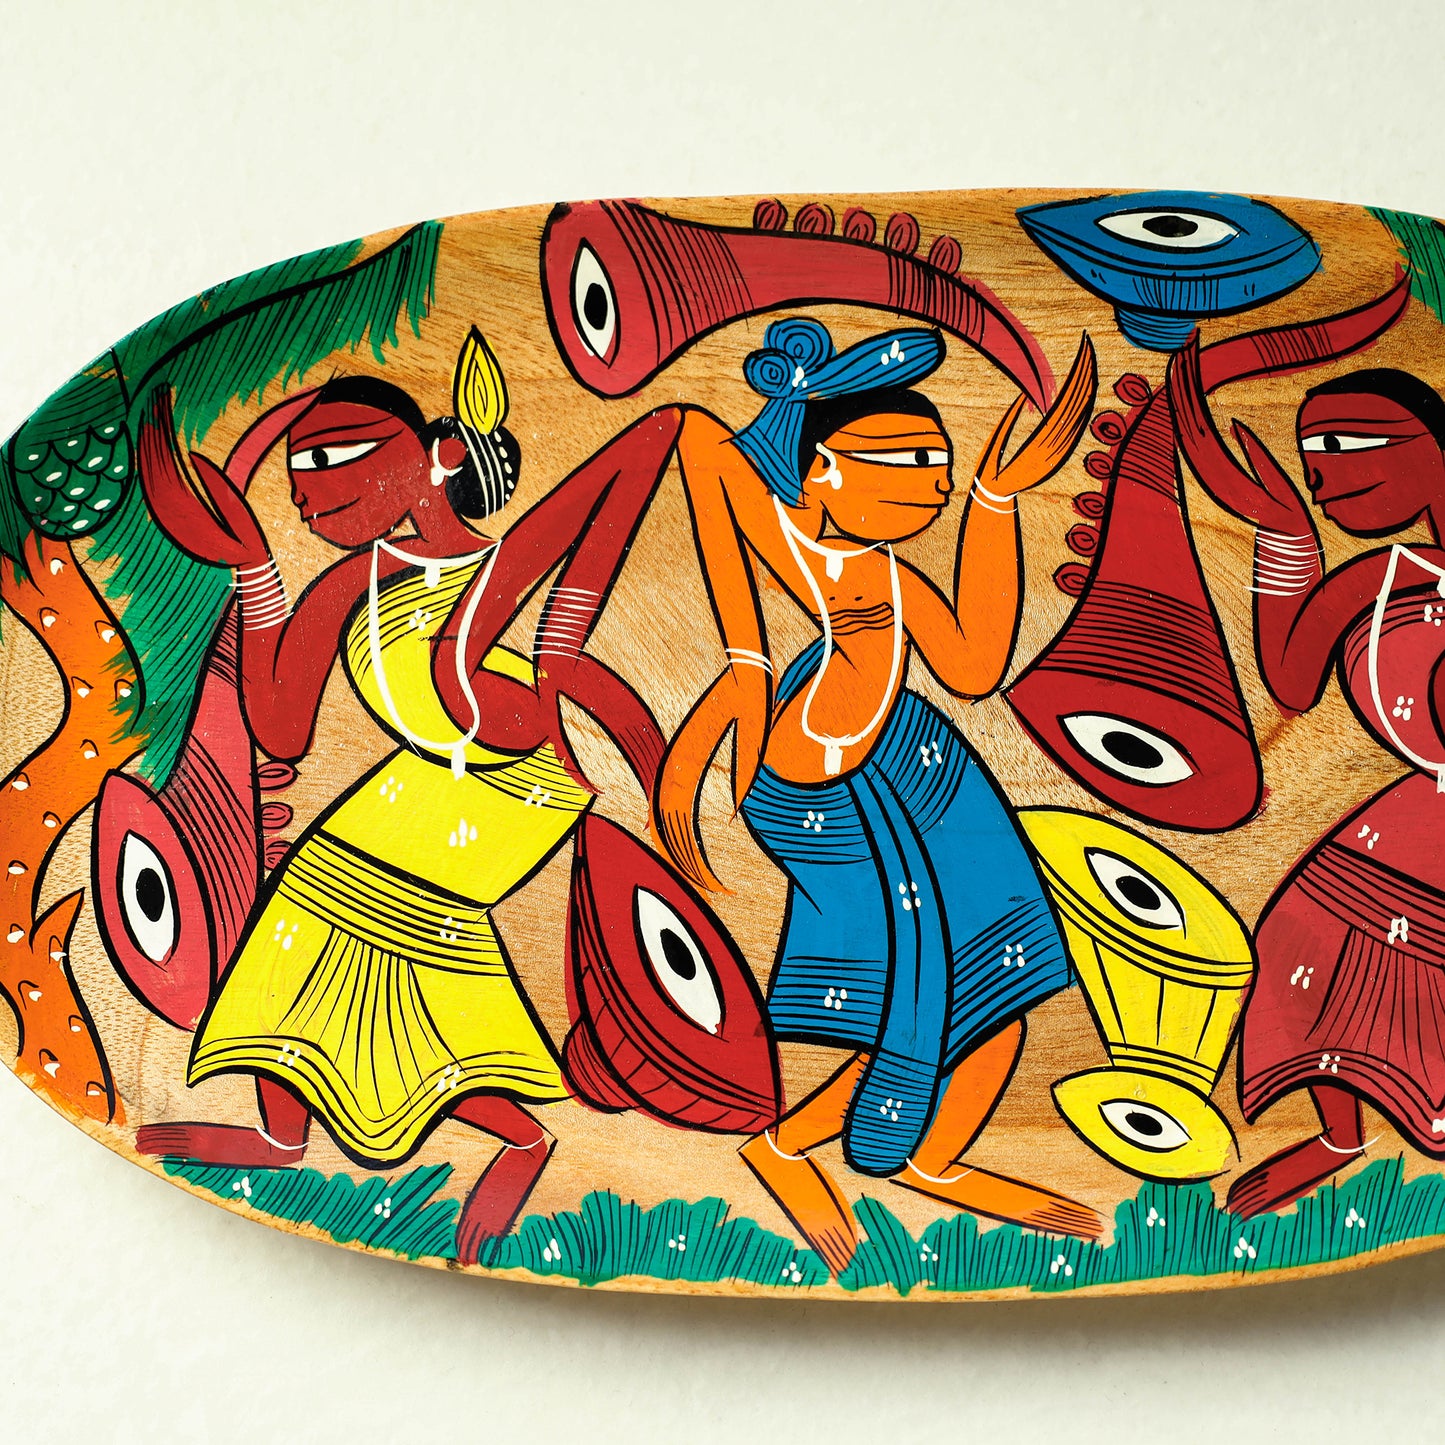 Traditional Pattachitra Painted Akashmoni Wooden Tray (7 x 12 in)